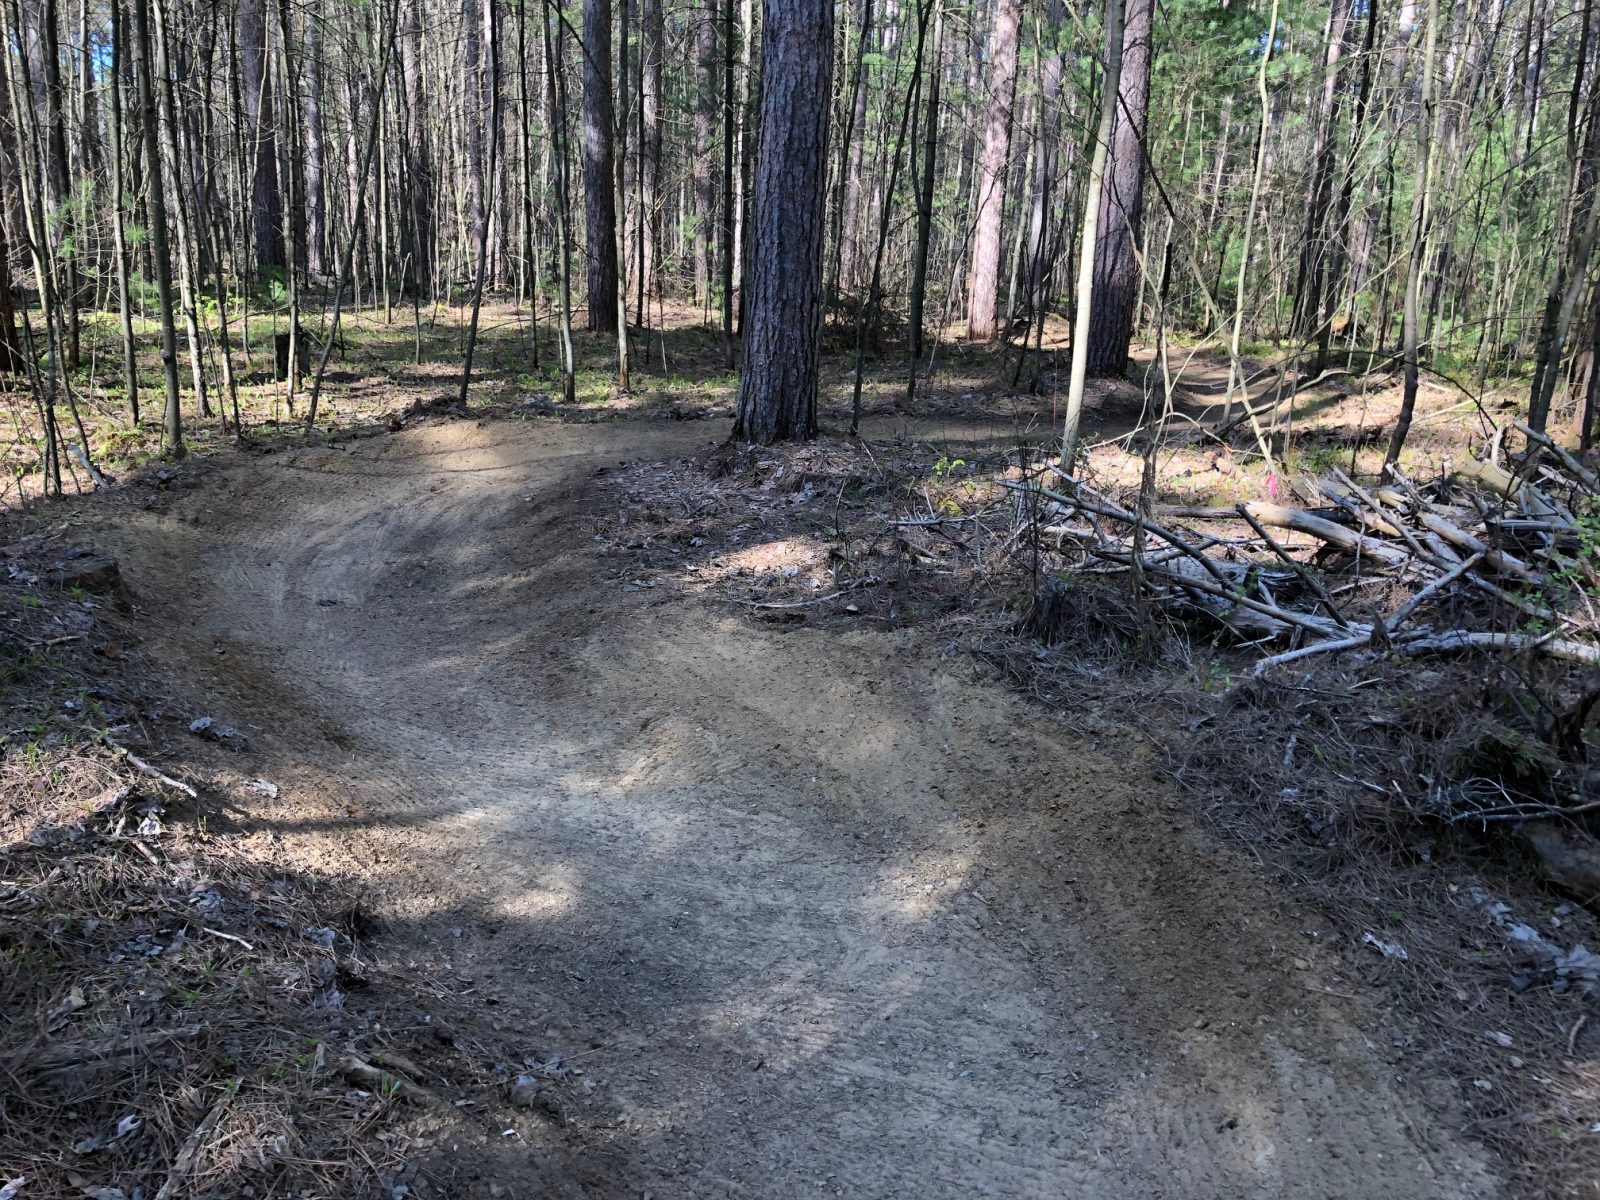 Larose Forest trails open for May long weekend